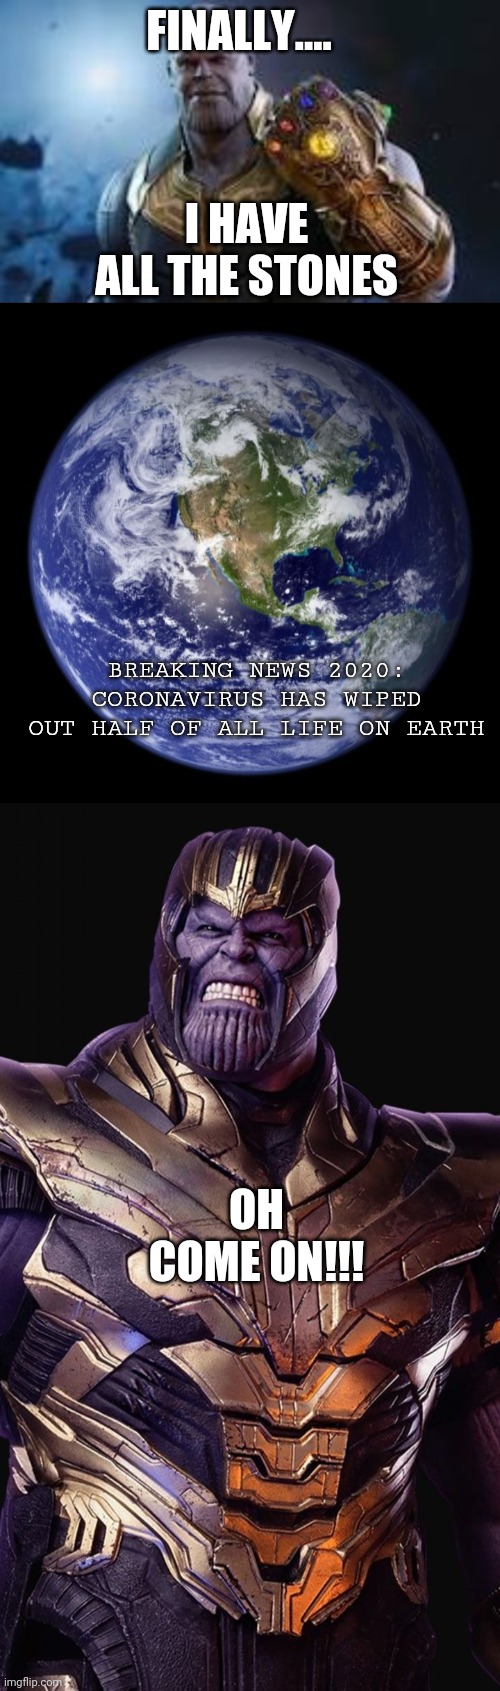 FINALLY.... I HAVE ALL THE STONES; BREAKING NEWS 2020: CORONAVIRUS HAS WIPED OUT HALF OF ALL LIFE ON EARTH; OH COME ON!!! | image tagged in earth | made w/ Imgflip meme maker